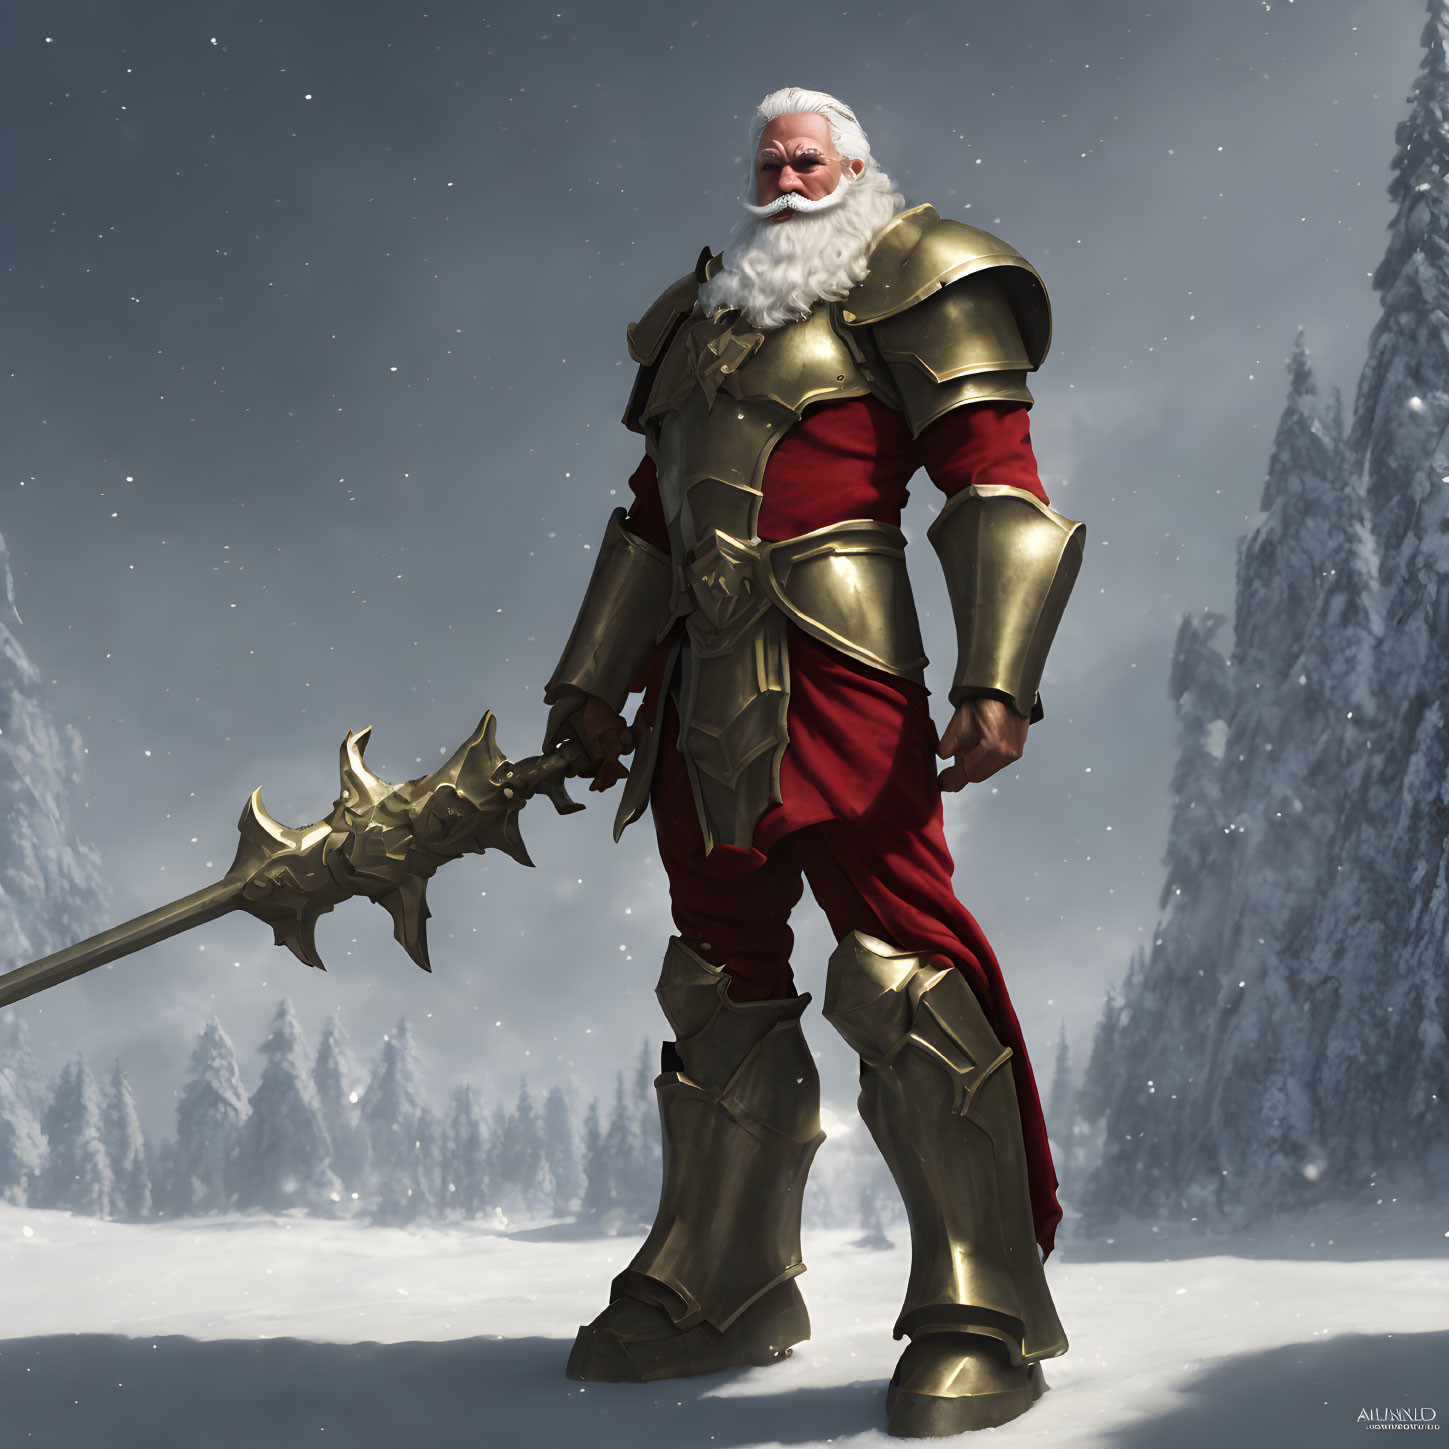 White-bearded warrior in red and gold armor wields spiked mace in snowy landscape